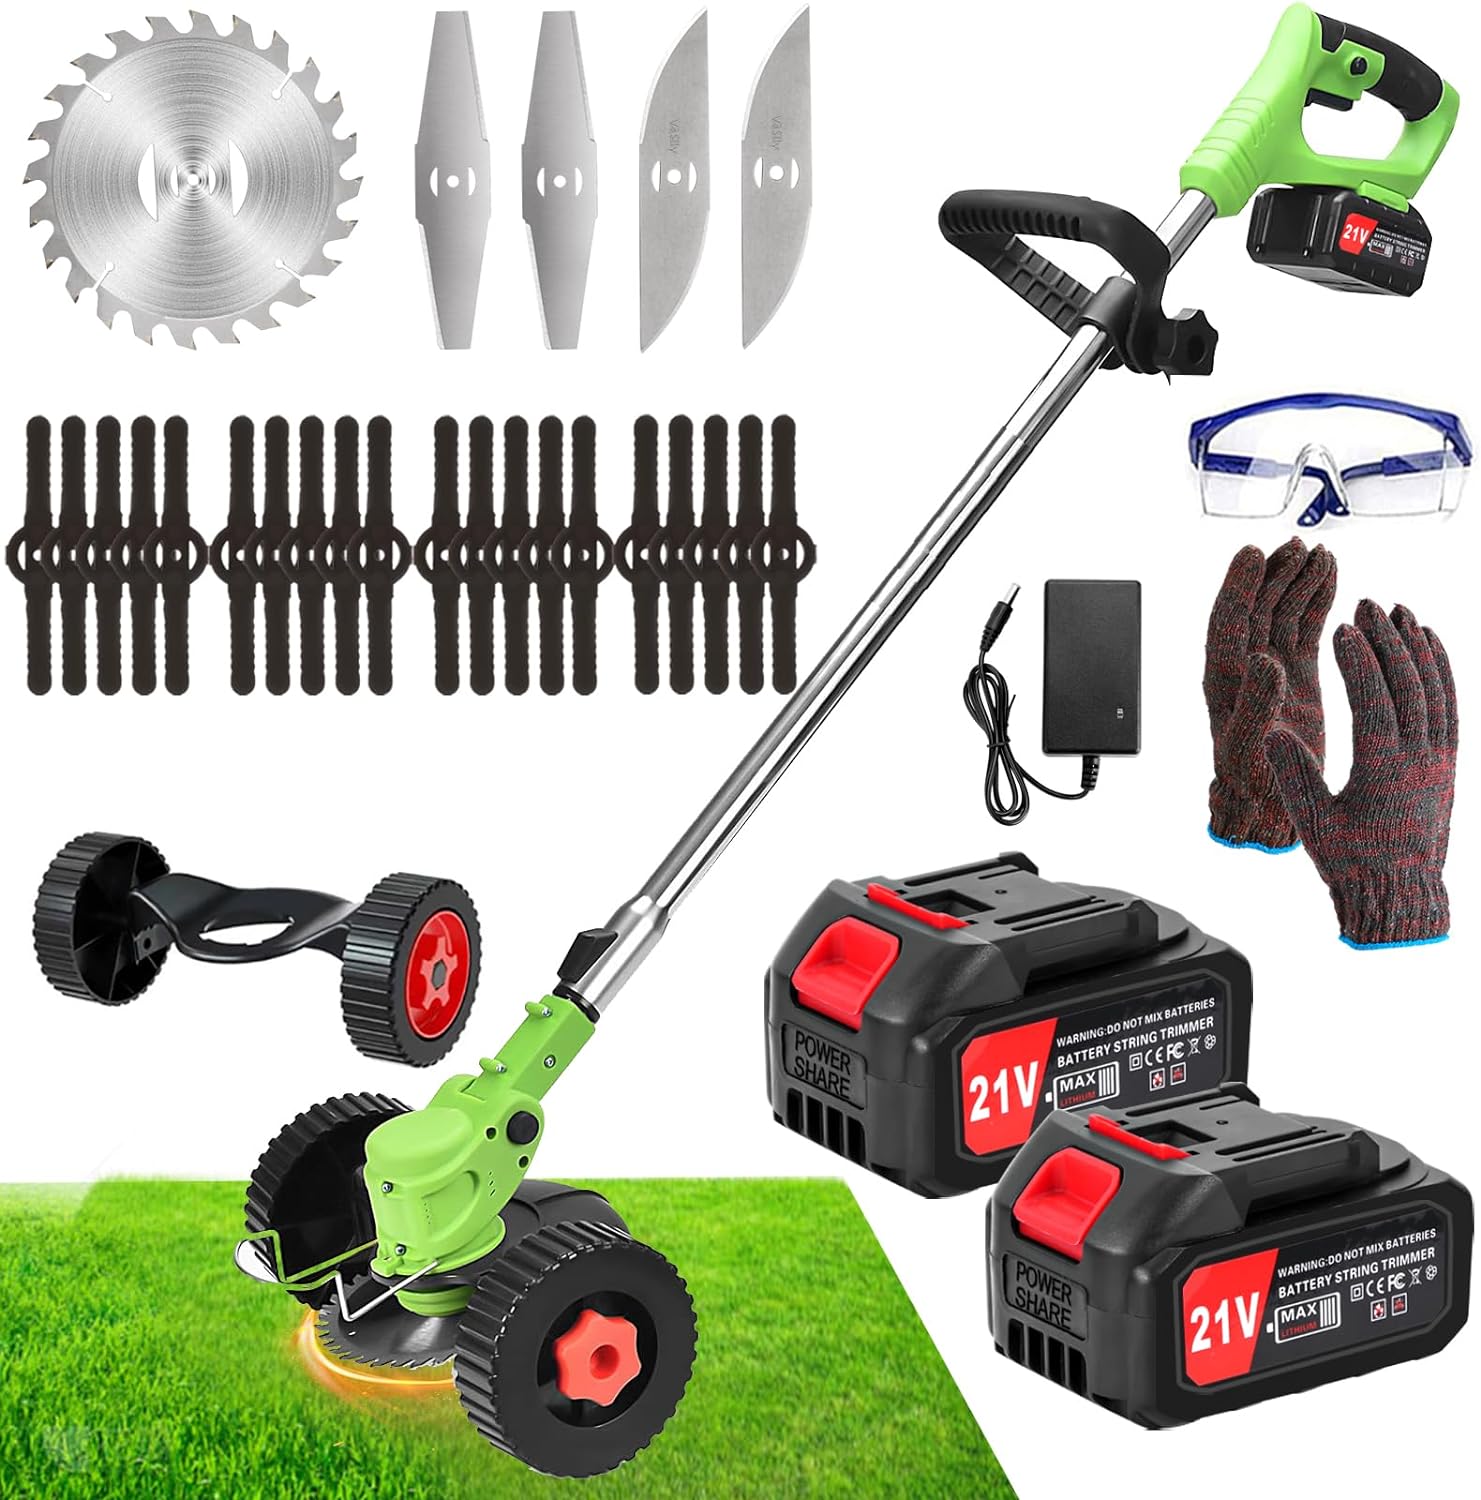 I came across this trimmer with sceptism. Boy, what a surprise! It does everything you would expect to do in your garden and yard. Cuts through maiontenance witth a breeze. Interchangeable attachments (all you really would need) are easy to attach. It is lightweight and can be handle by almost anyone. Battery life is on par with more expensive machines. Looking for a bargain trimmer/weeder/pruner/brushcutter This may be the one for you. Steroids on a budget.